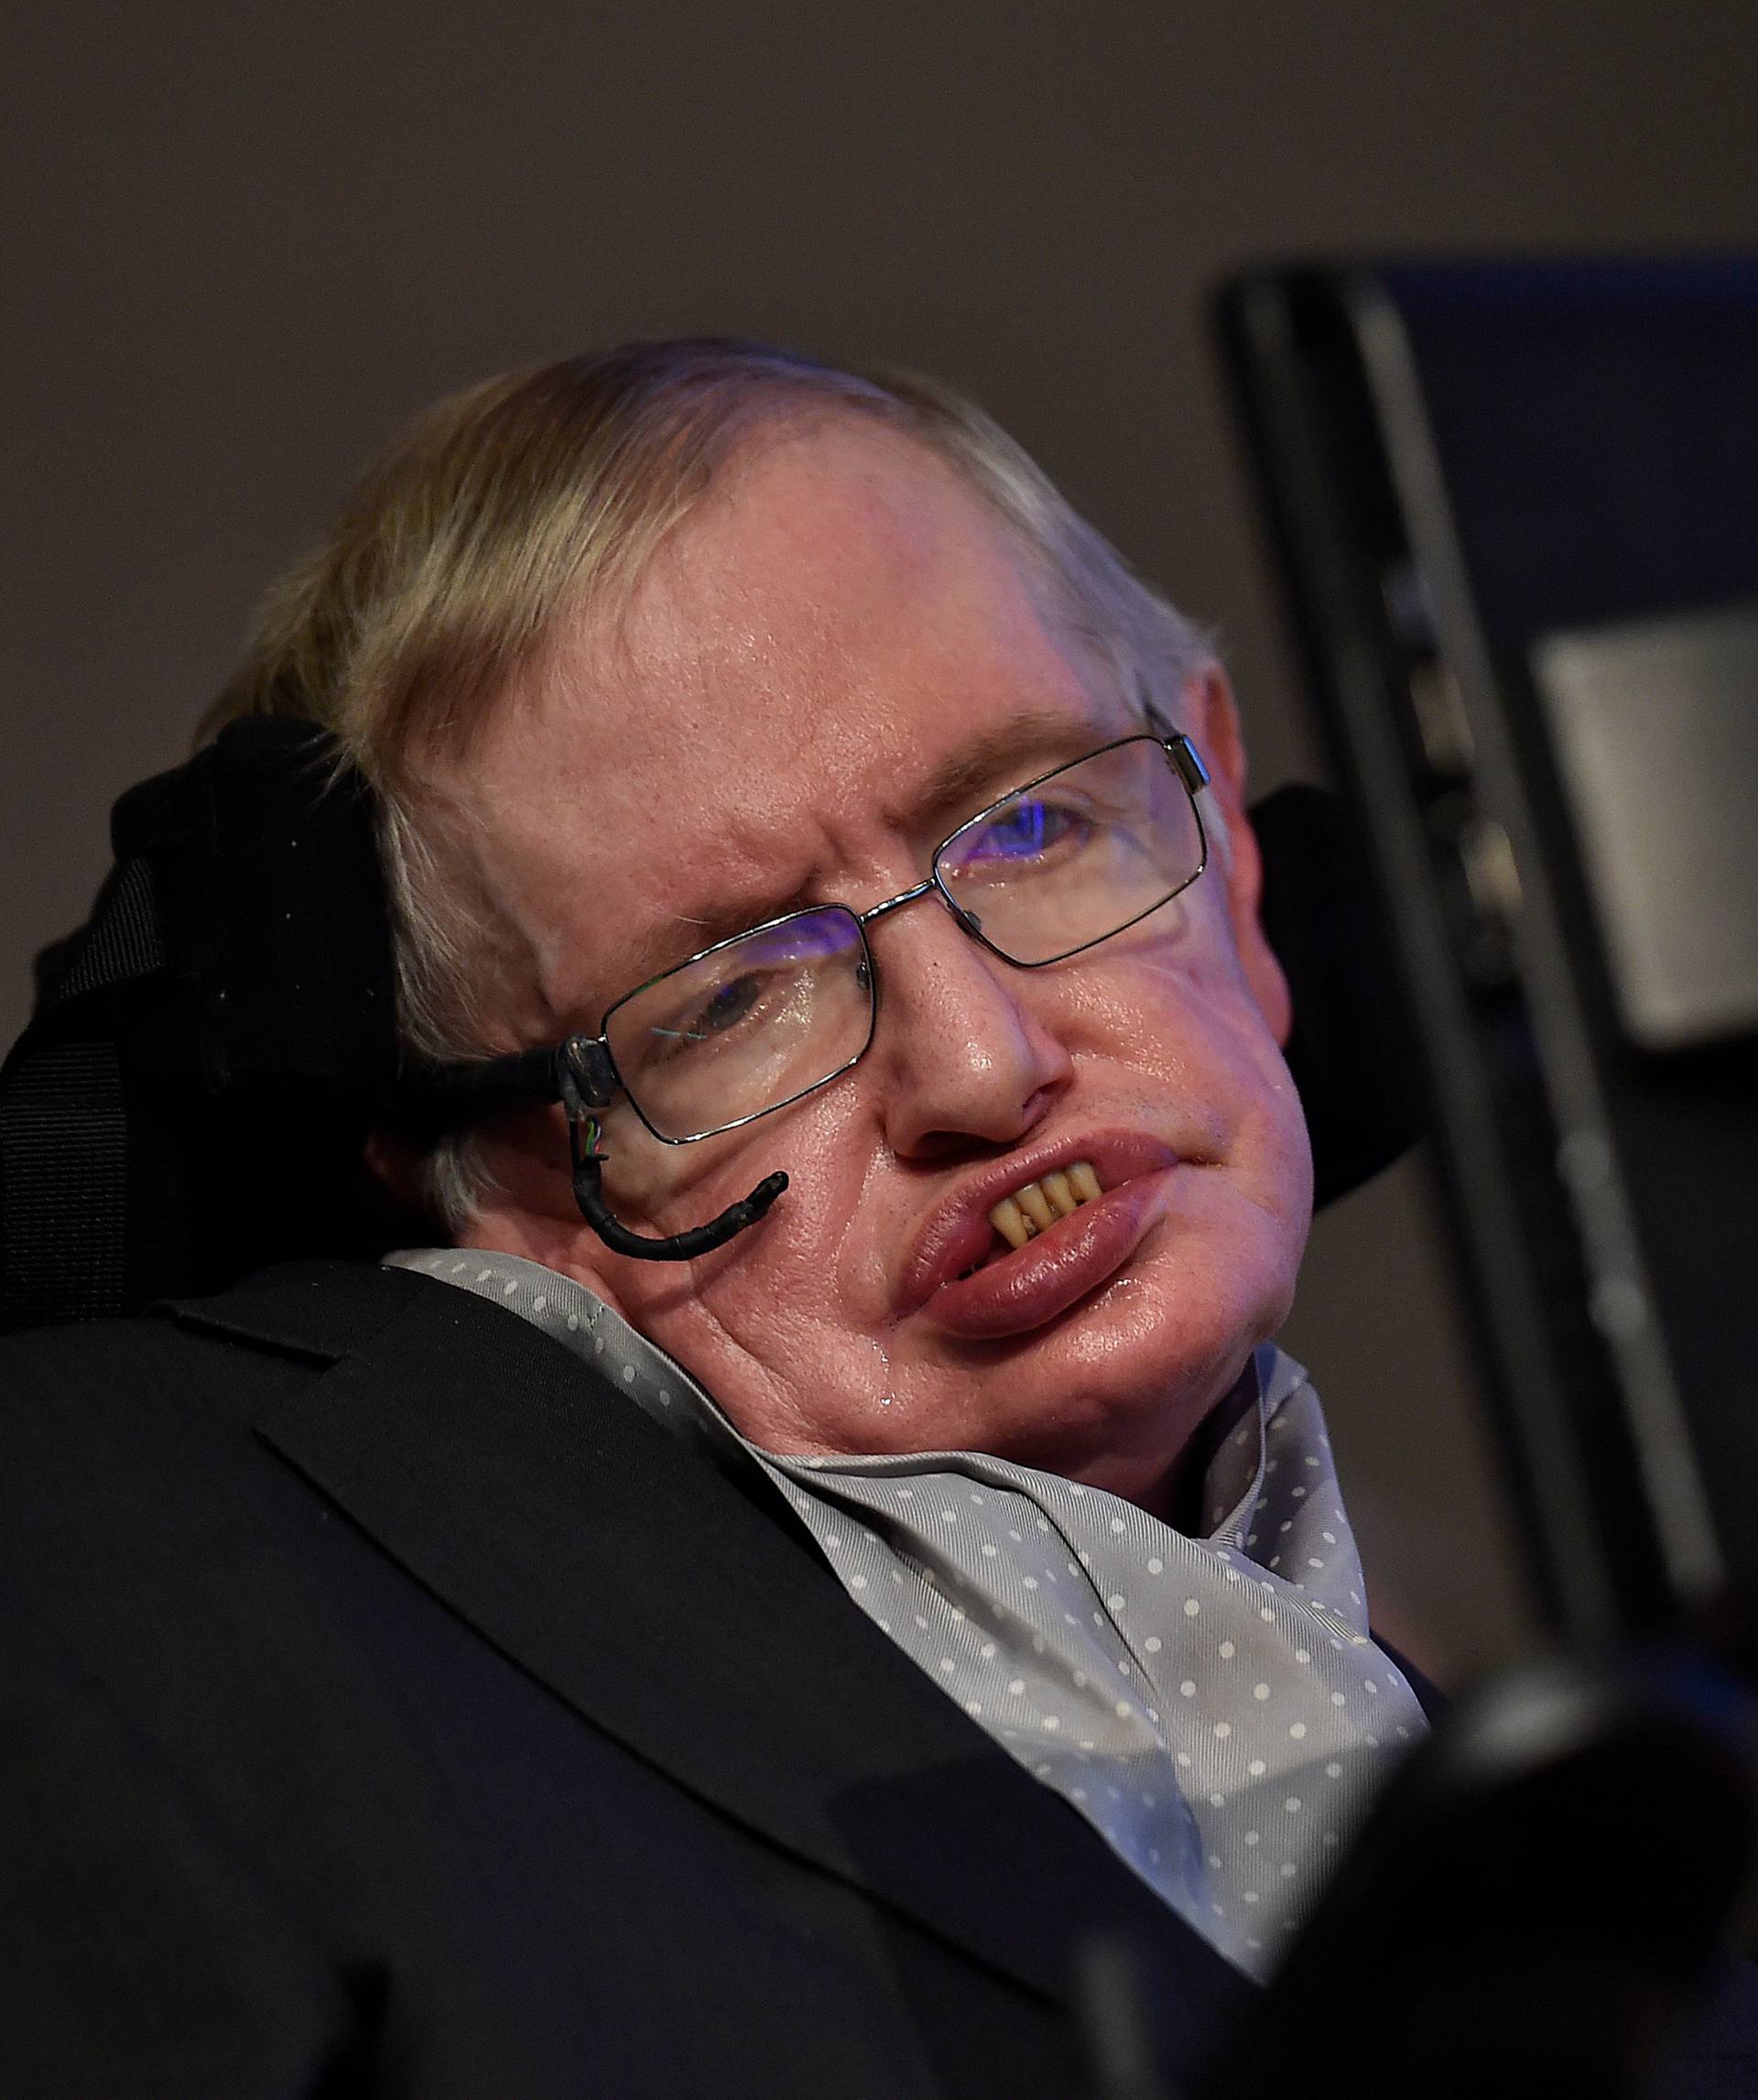 FILE PHOTO: British scientist and theoretical physicist Hawking attends a launch event for a new award for science communication in London